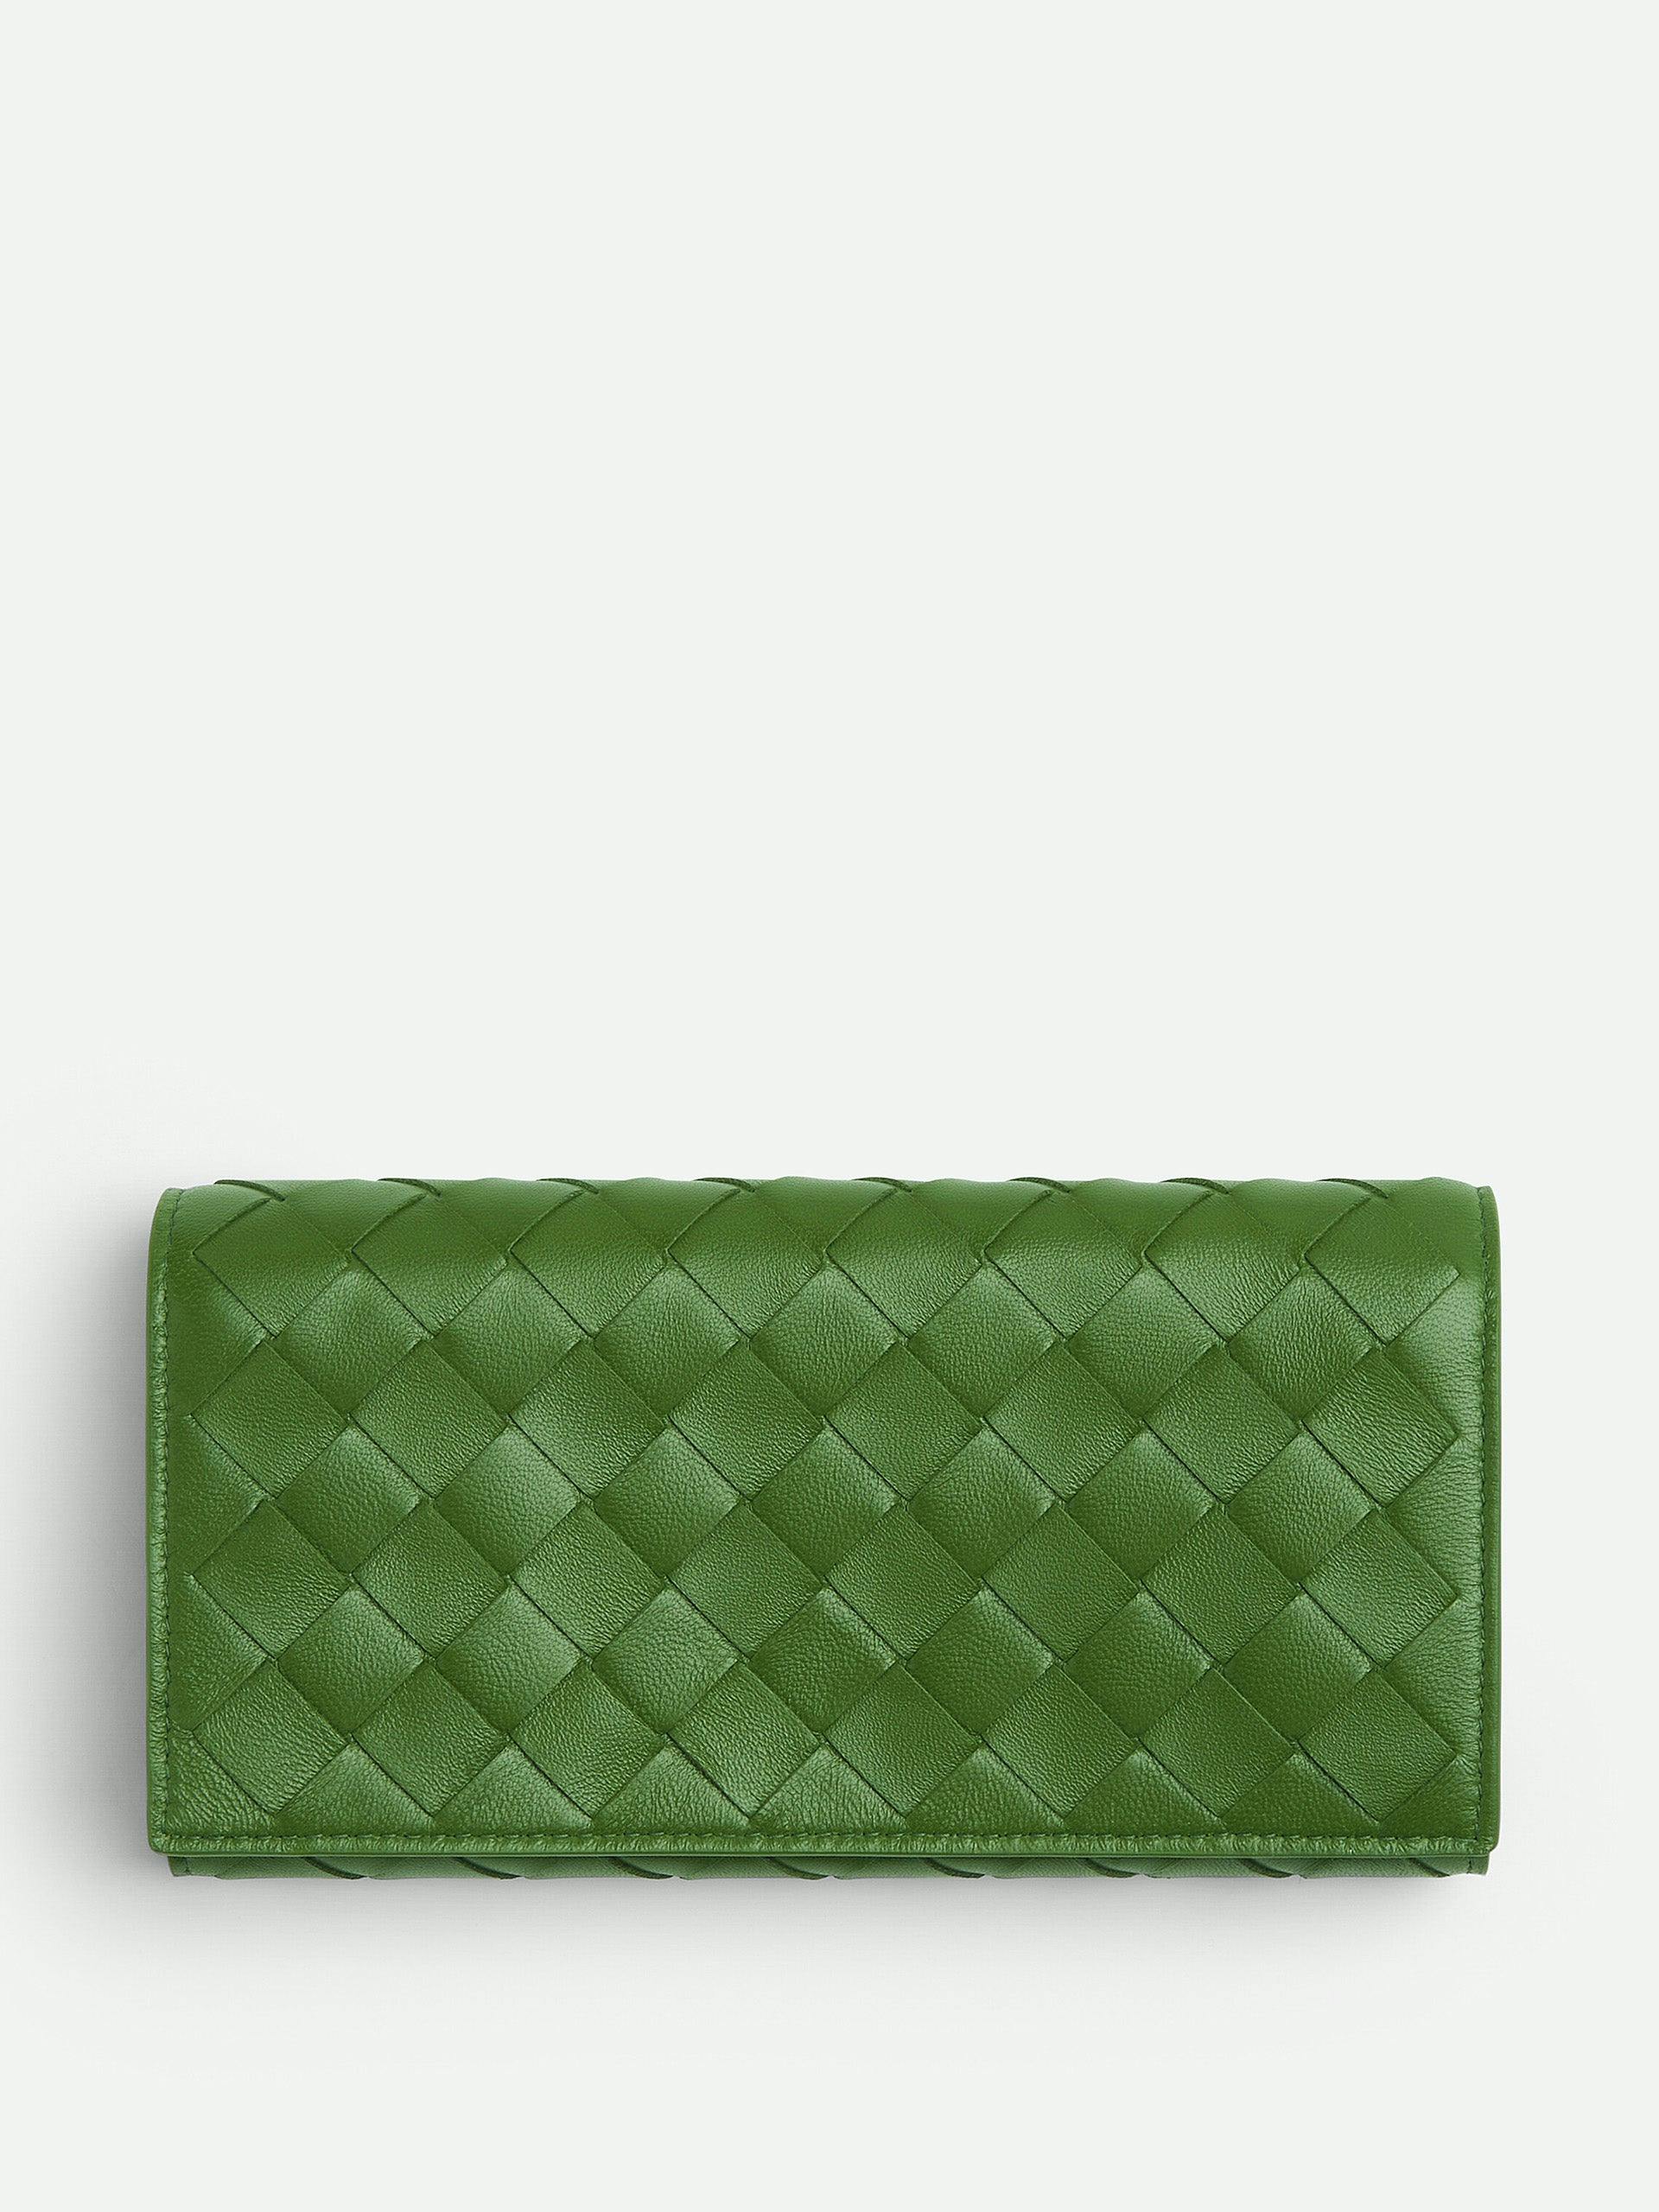 Woven leather wallet